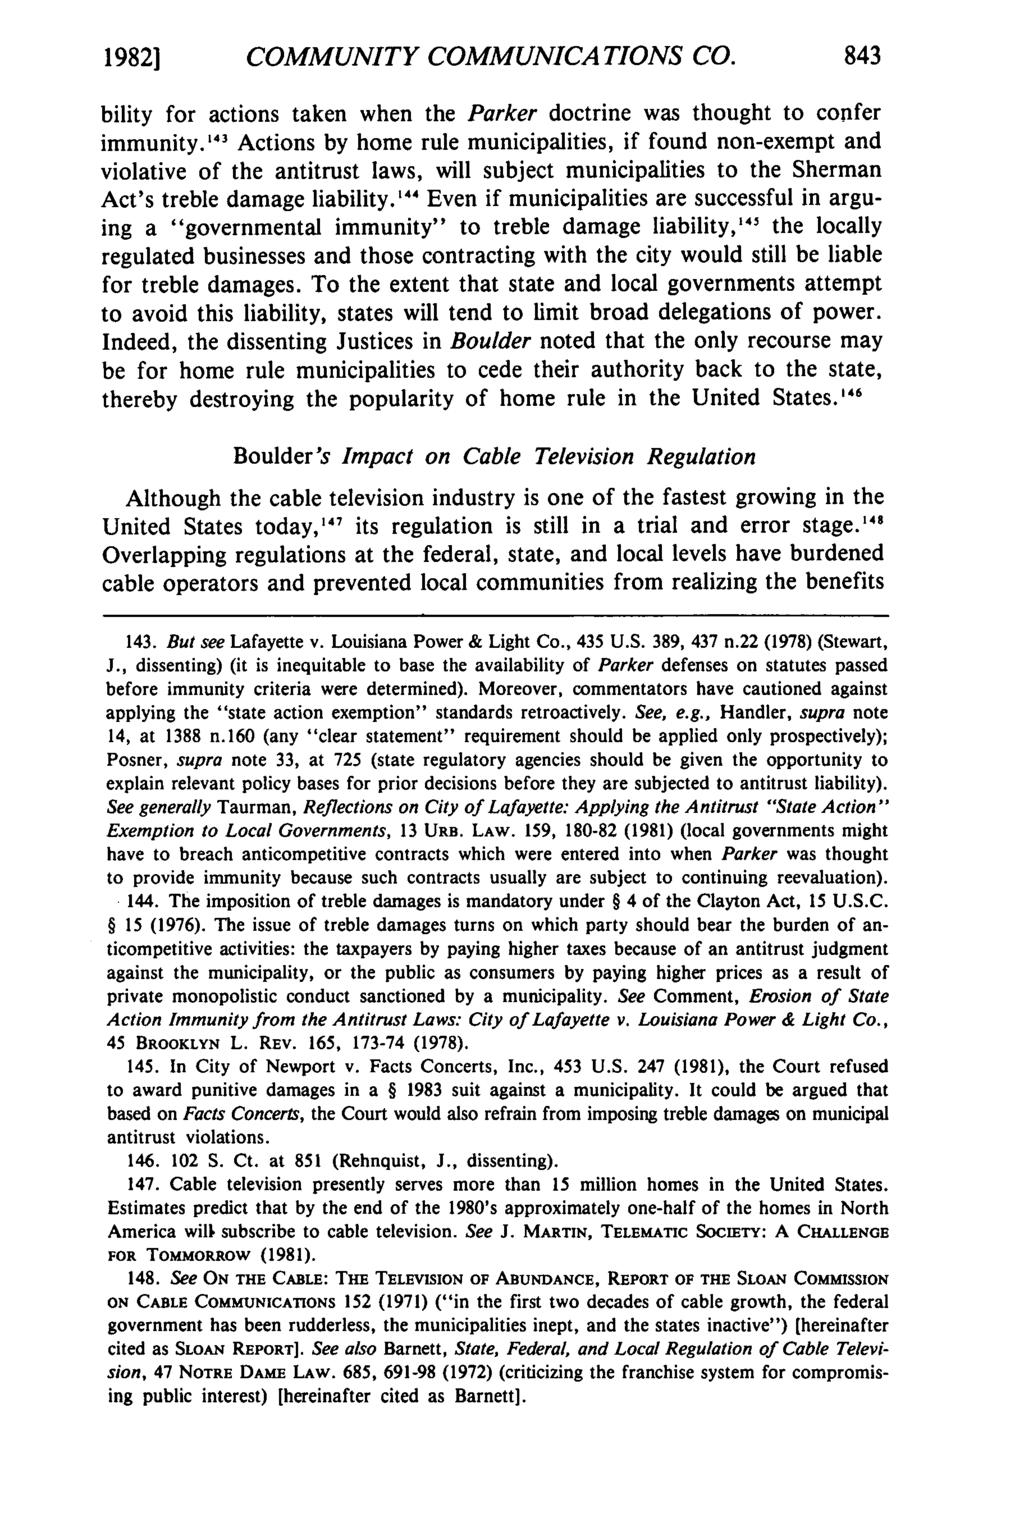 19821 COMMUNITY COMMUNICATIONS CO. bility for actions taken when the Parker doctrine was thought to confer immunity.